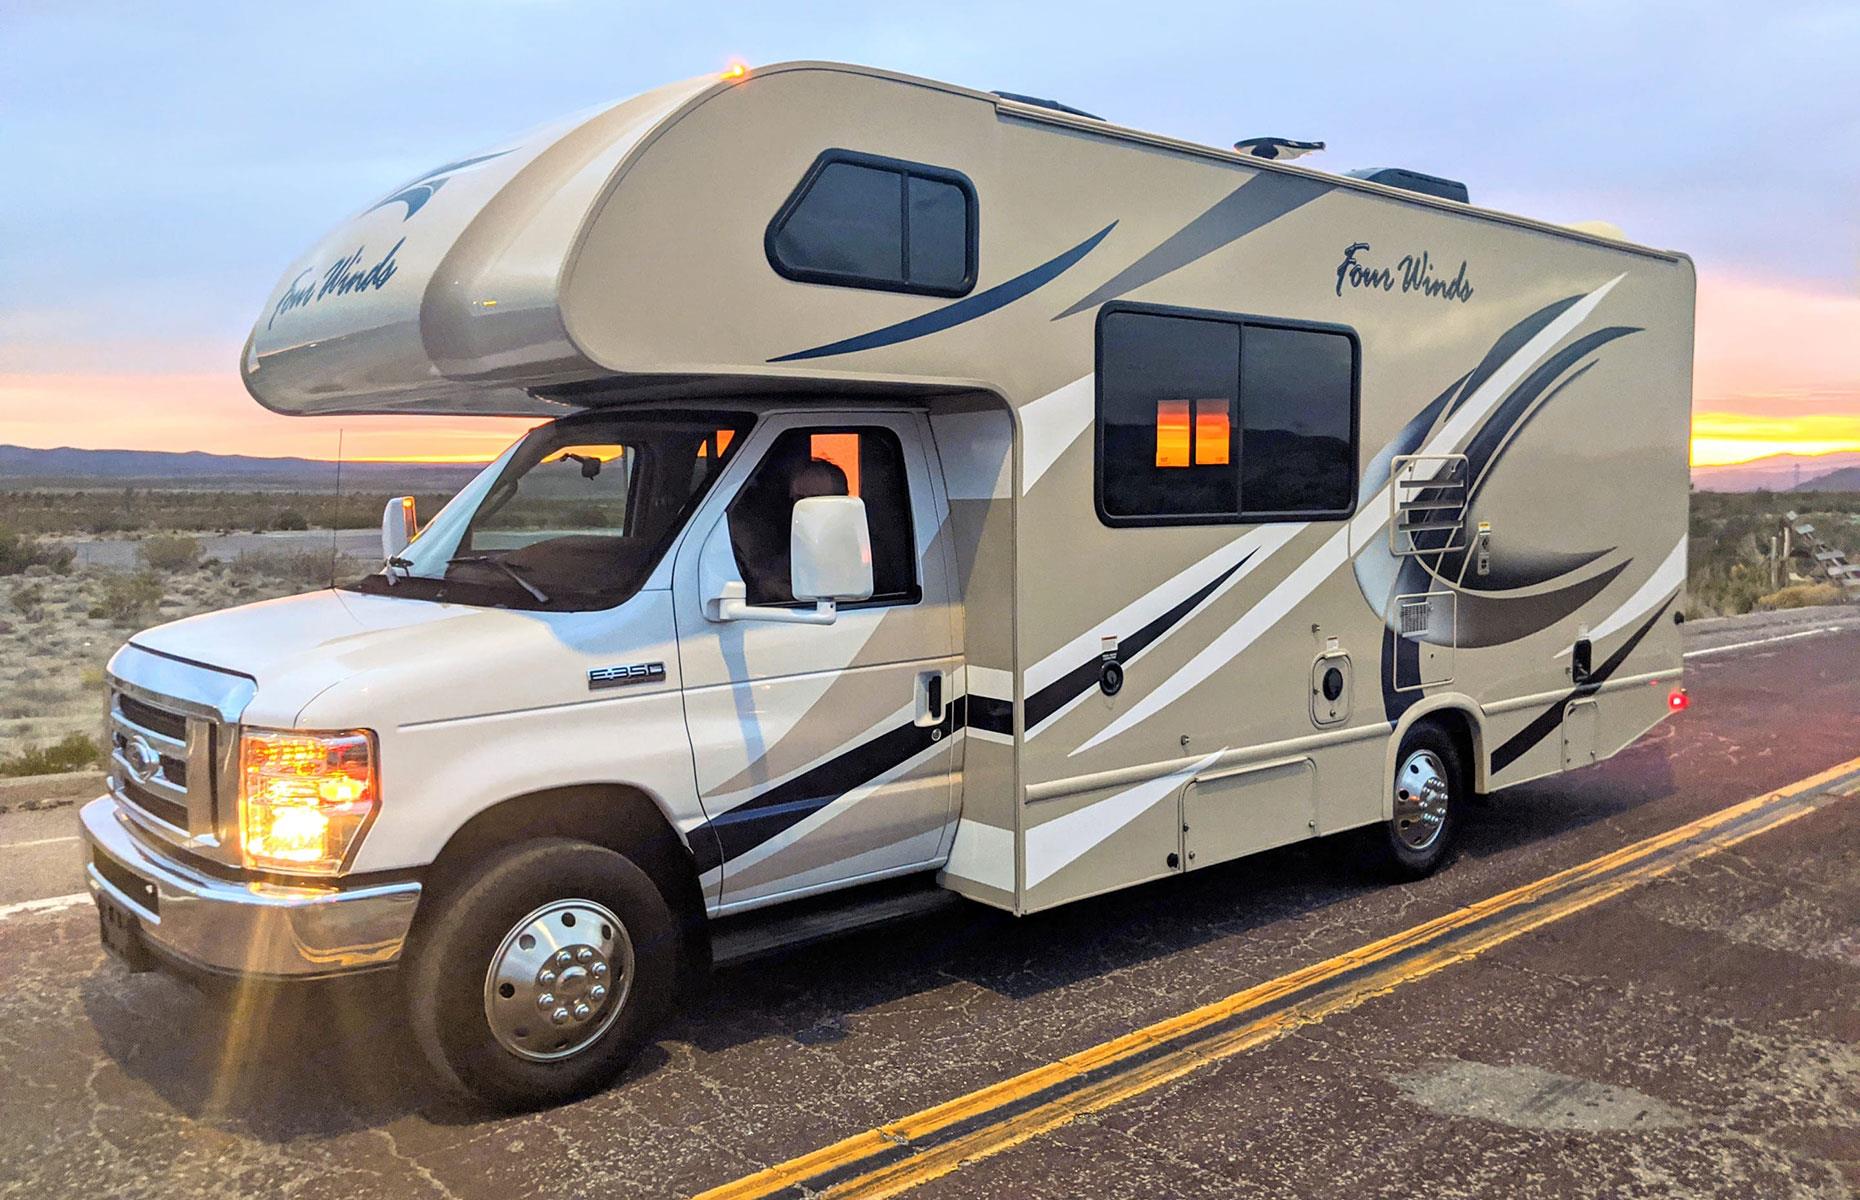 Comfy and relatively compact, this Class C RV is ideal for a peaceful long weekend away with the family. At 23 feet (7m) long, this homely vehicle can sleep up to five people, making it great for a small family vacation. On board is everything you’d need for a short getaway. The convenient kitchen comes with a refrigerator/freezer, microwave, stove and sink, with Brazilian Cherry cabinetry for all your groceries.